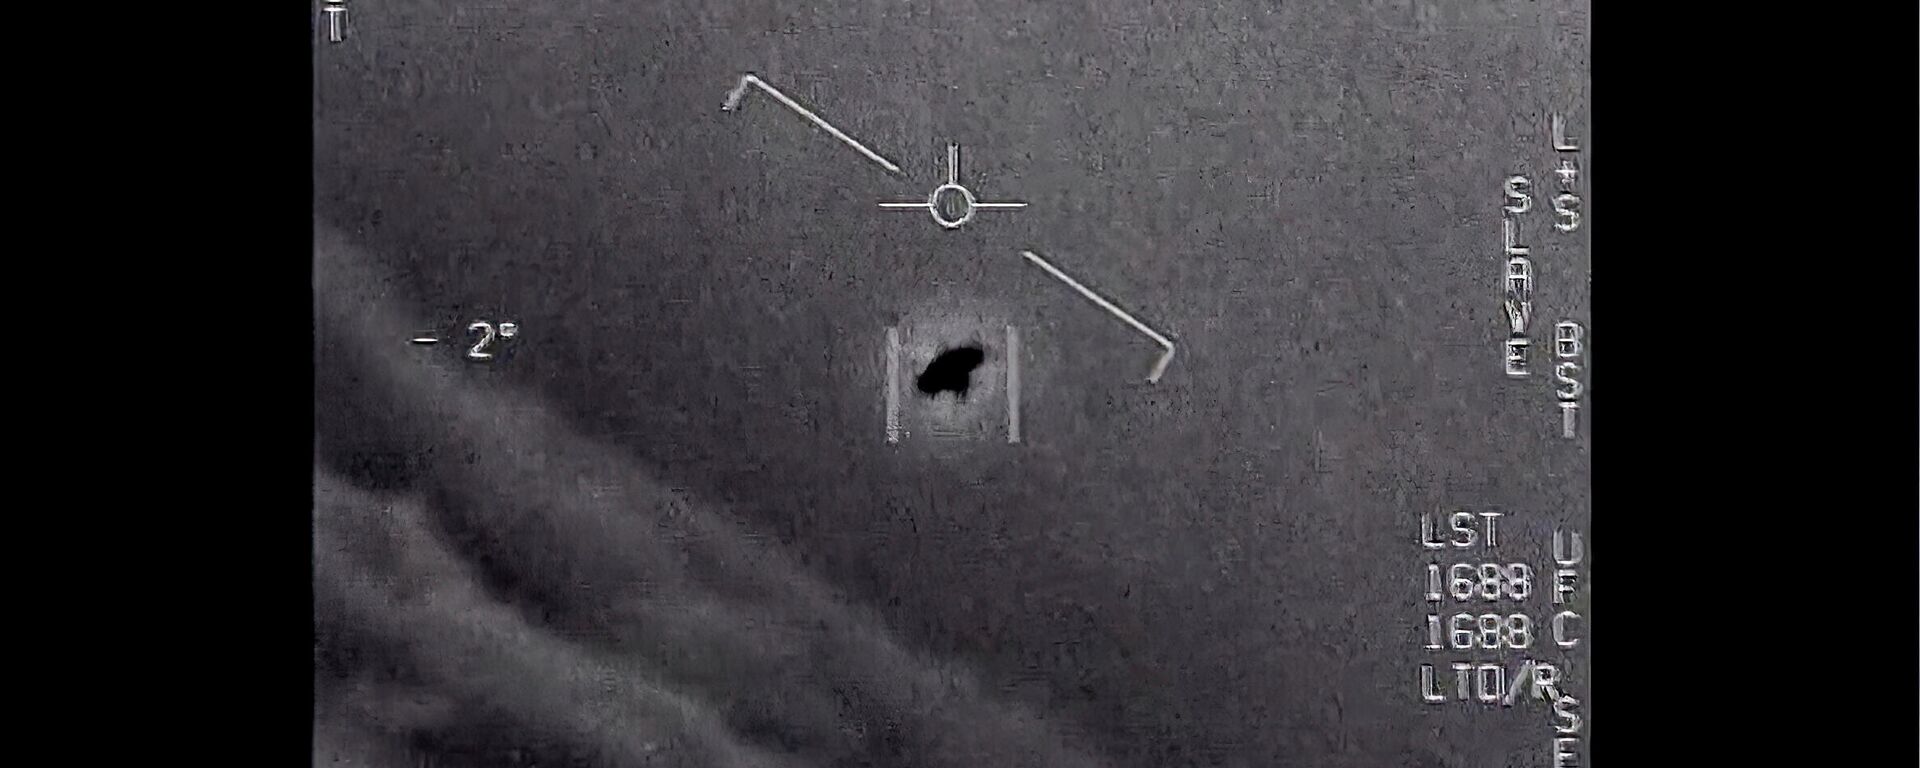 The image from video provided by the Department of Defense labelled Gimbal, from 2015, an unexplained object is seen at center as it is tracked as it soars high along the clouds, traveling against the wind. - Sputnik International, 1920, 20.12.2022